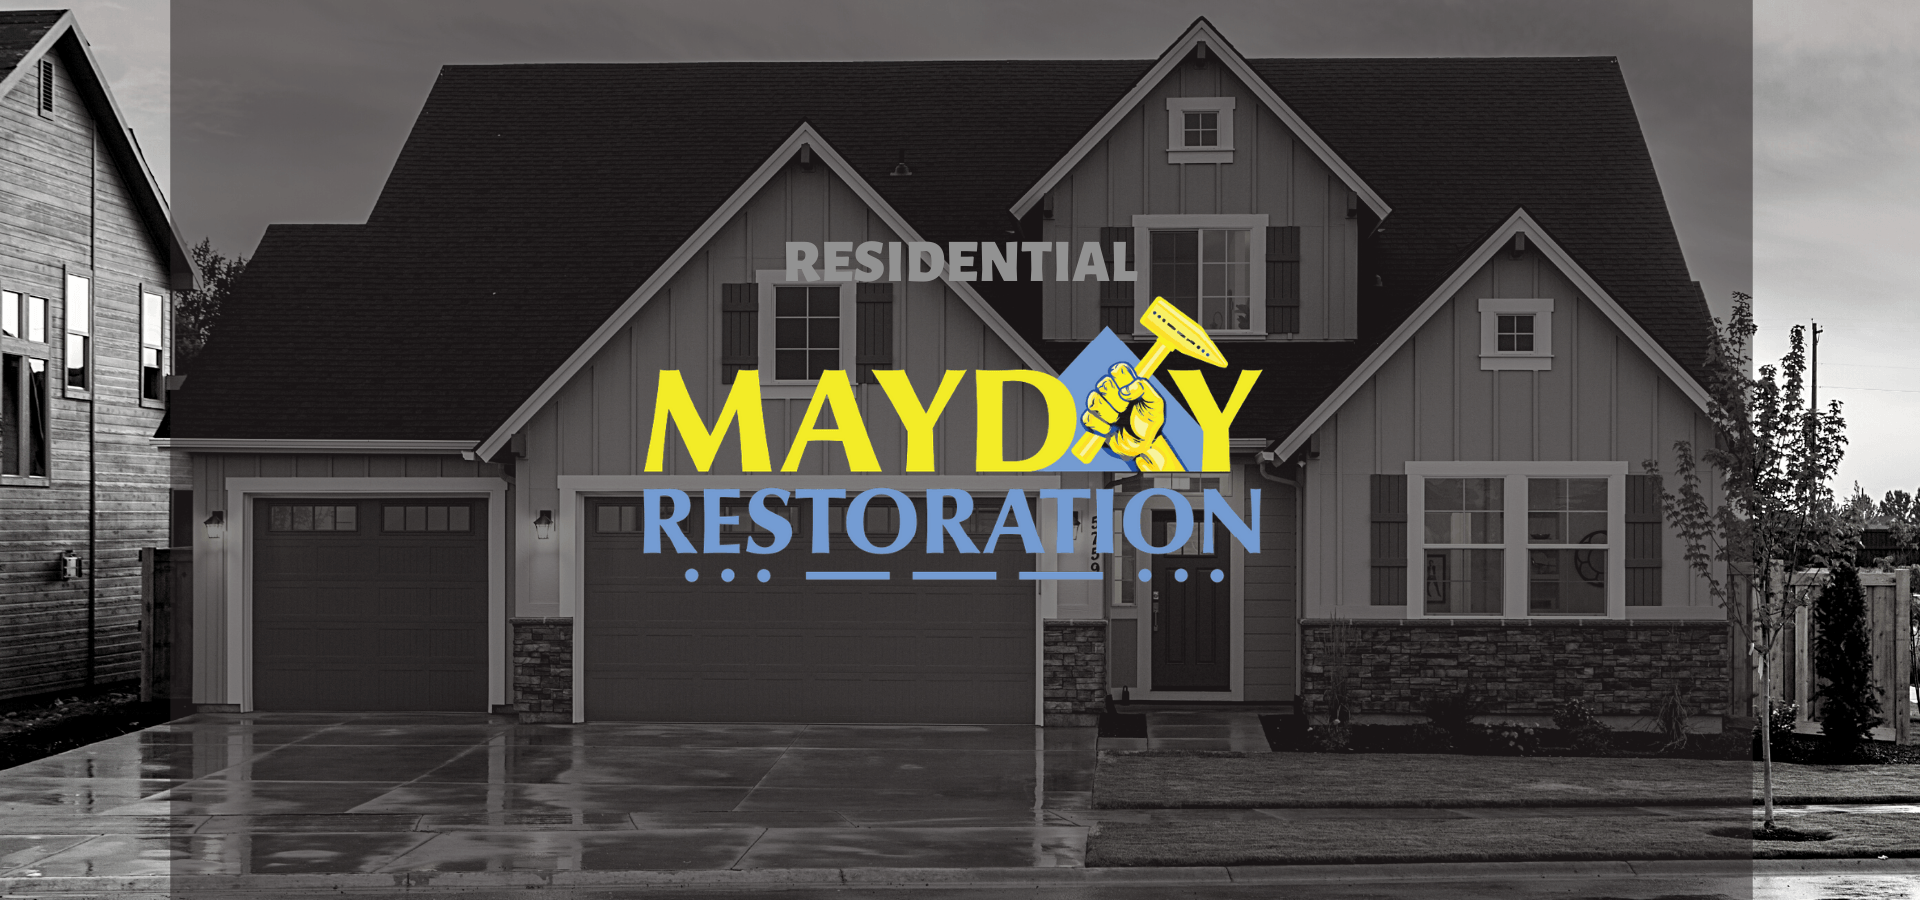 Residential Roofing Services provided by Mayday Restoration